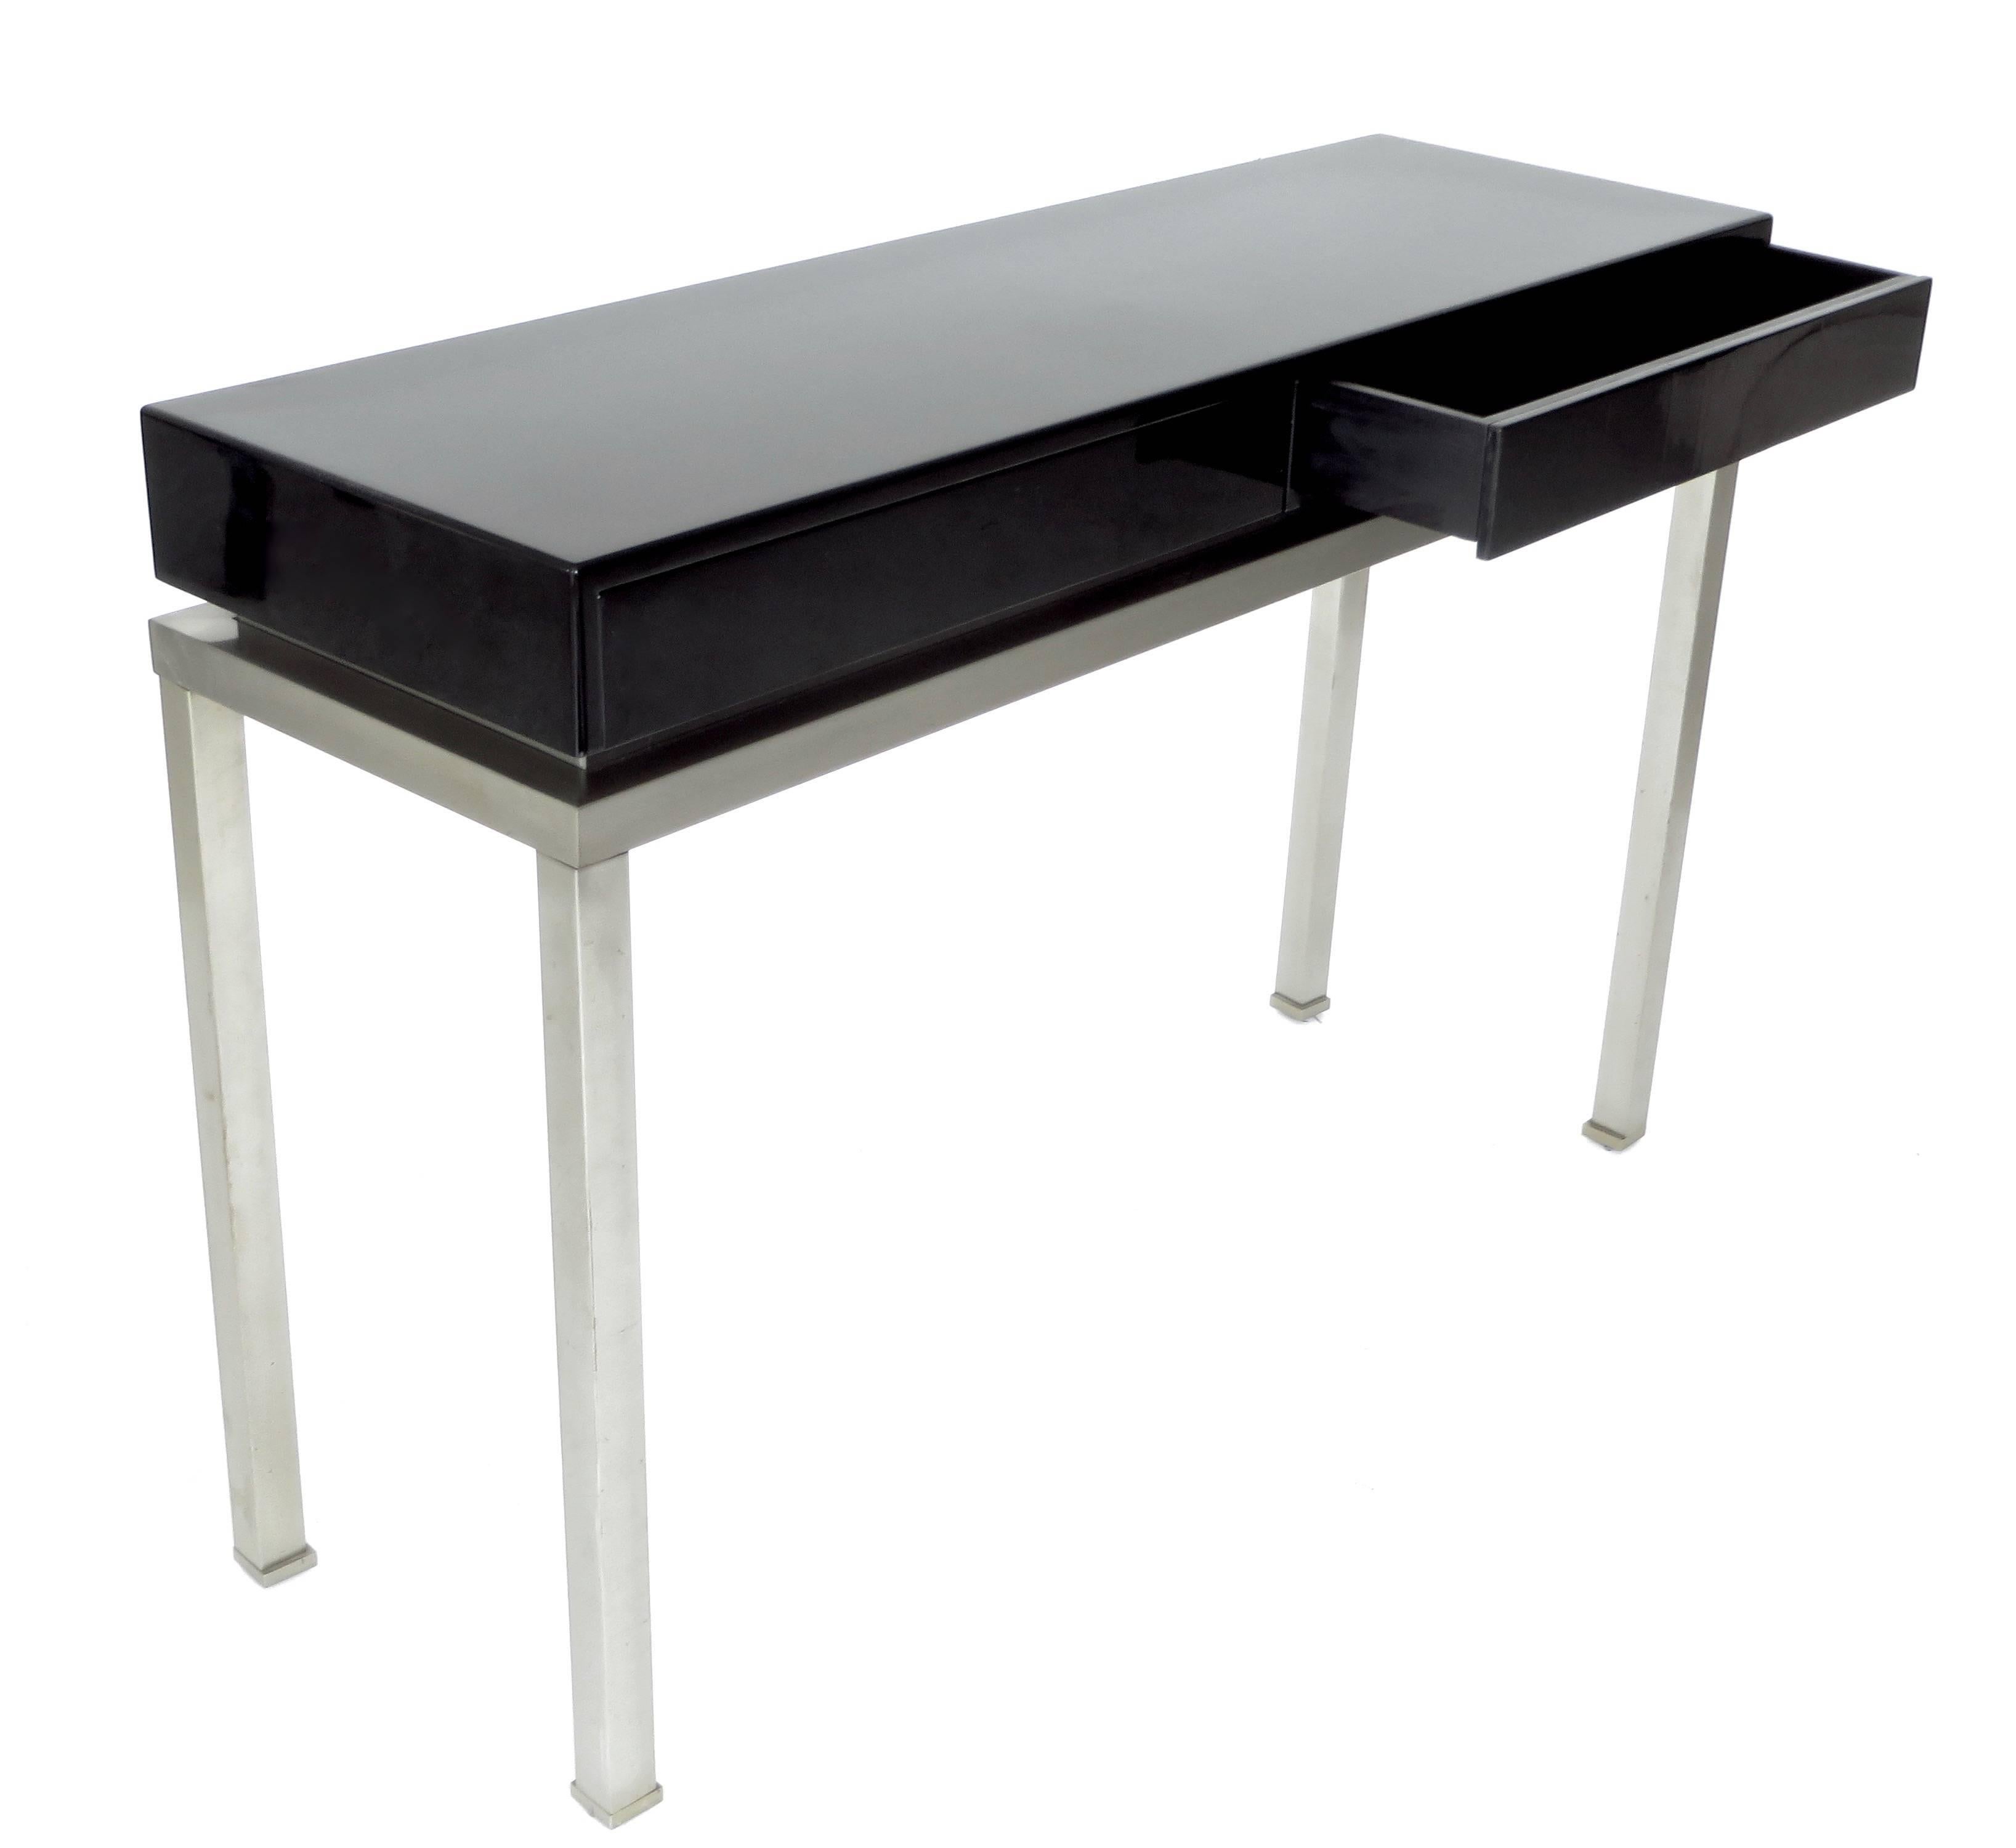 Late 20th Century  Maison Jansen French Black Lacquer and Brushed Stainless Steel Legs Console